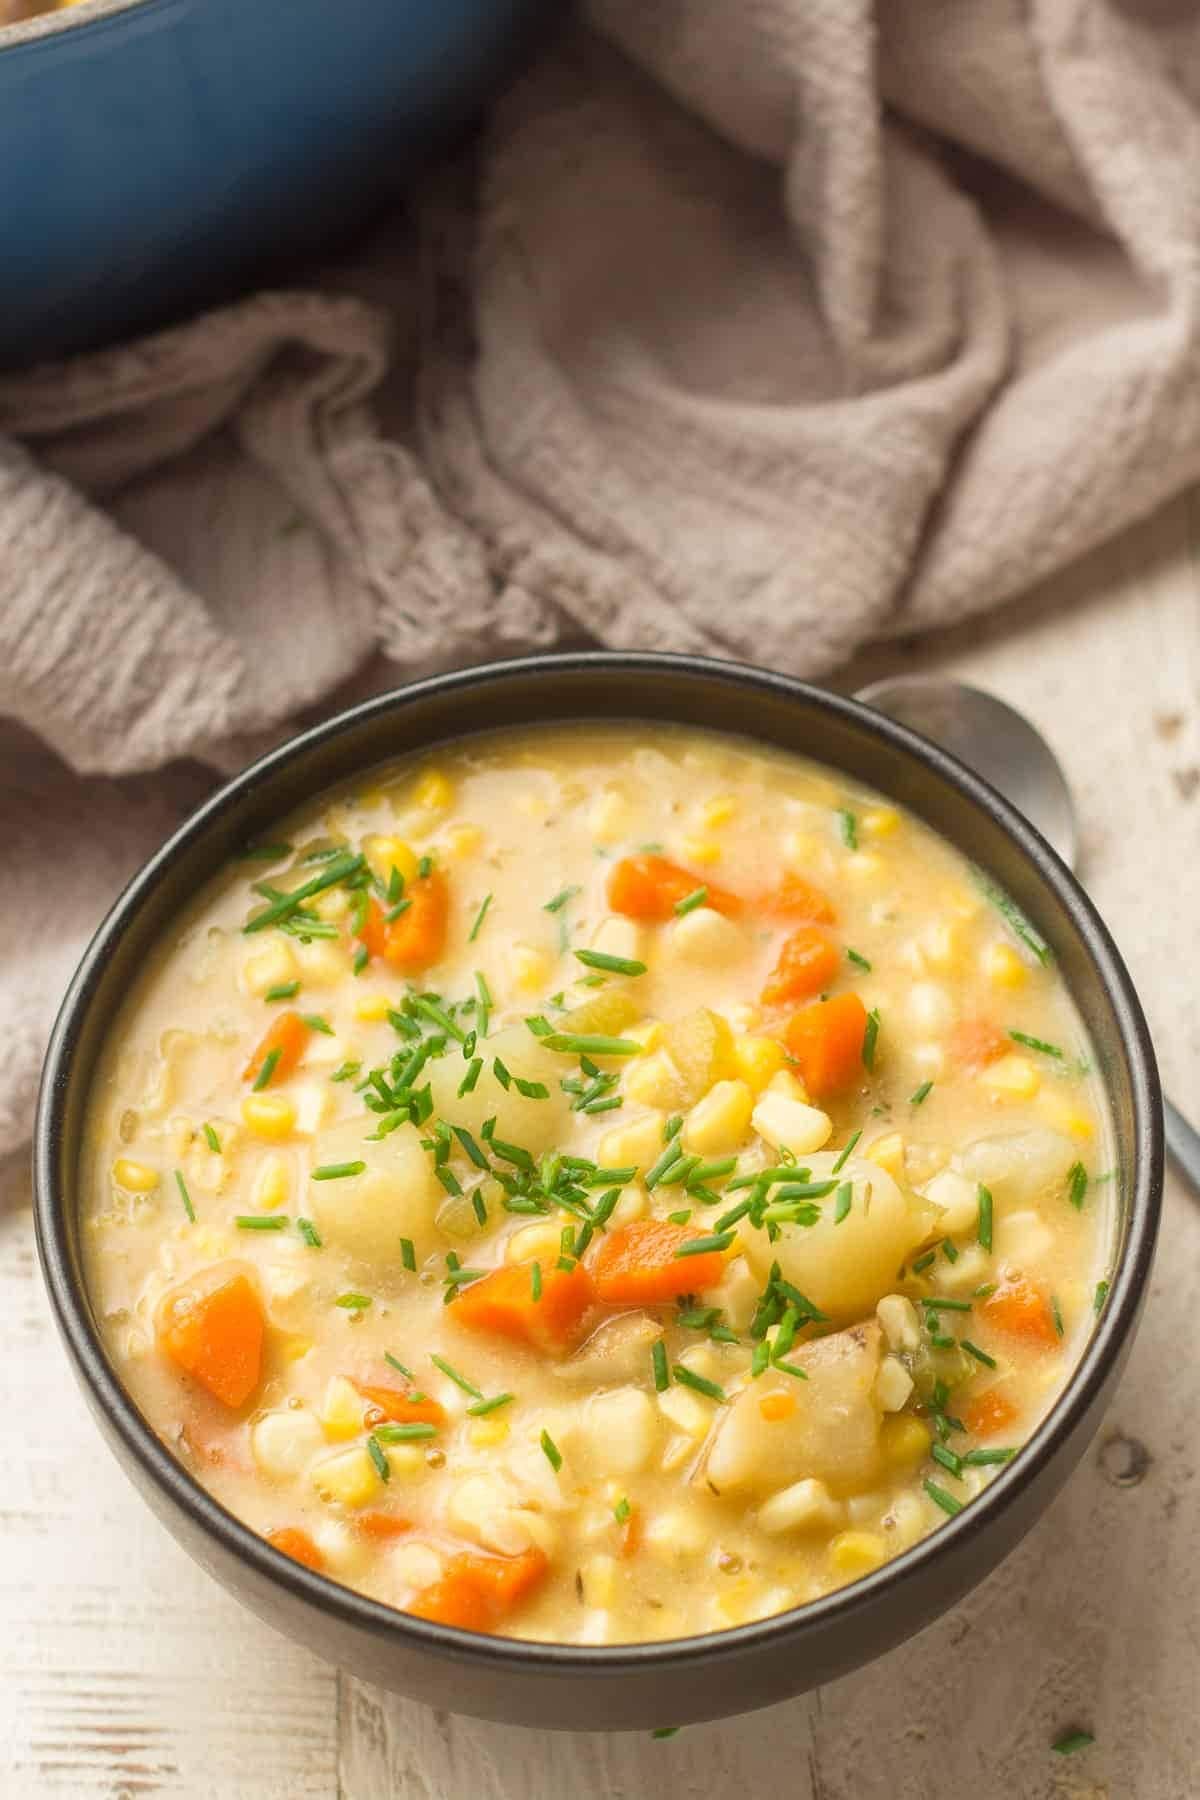 Bowl of homemade Corn Chowder with potatoes, carrots, corn kernels and garnished with chopped chives